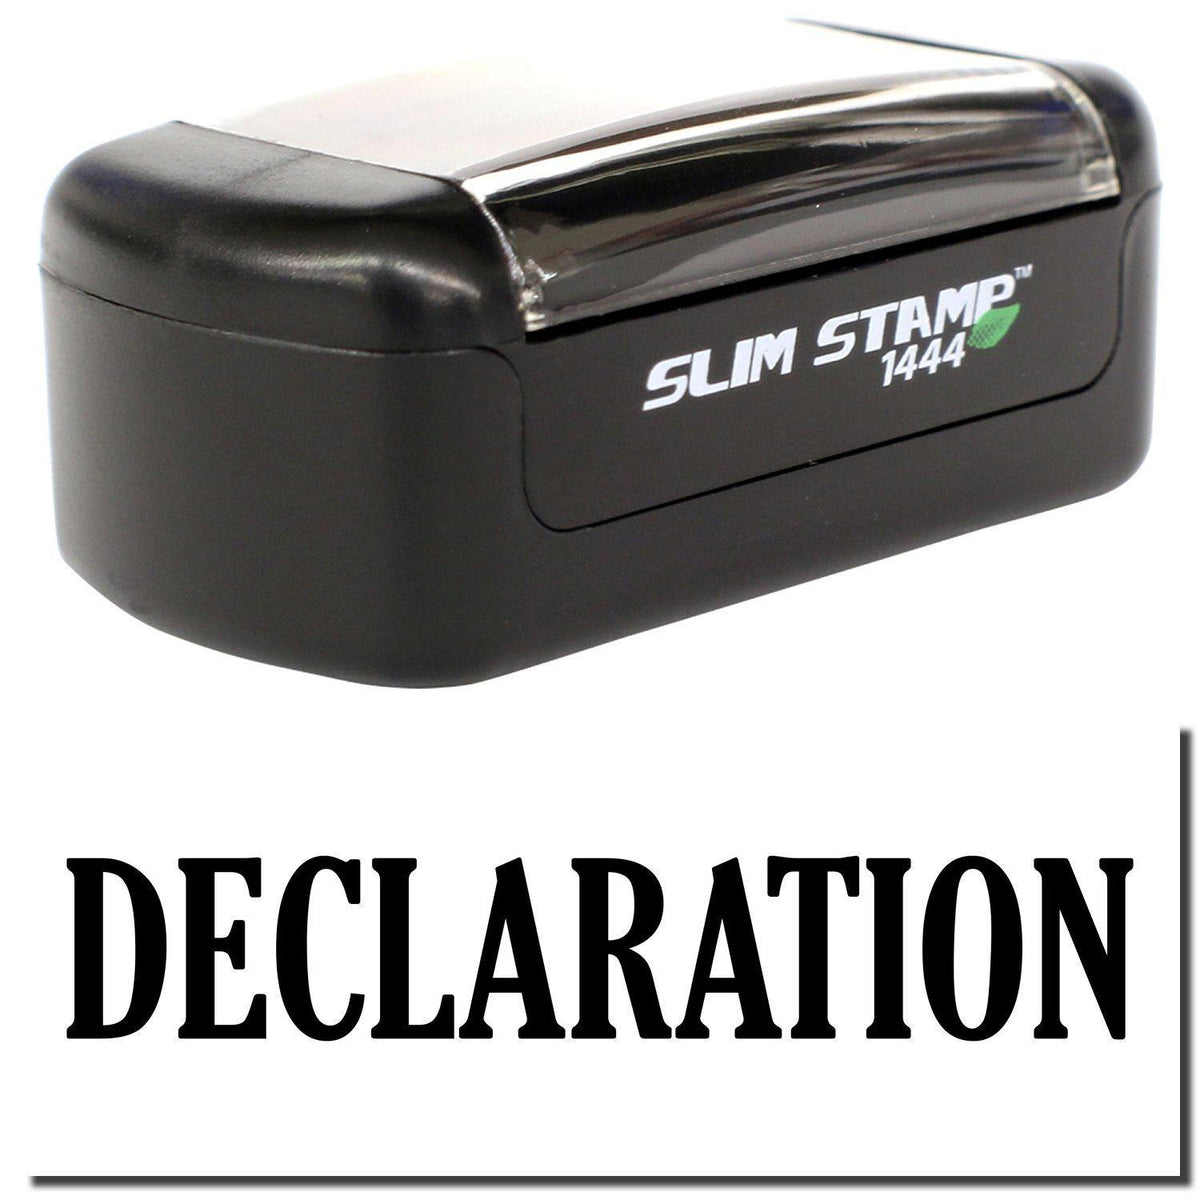 A stock office pre-inked stamp with a stamped image showing how the text &quot;DECLARATION&quot; is displayed after stamping.